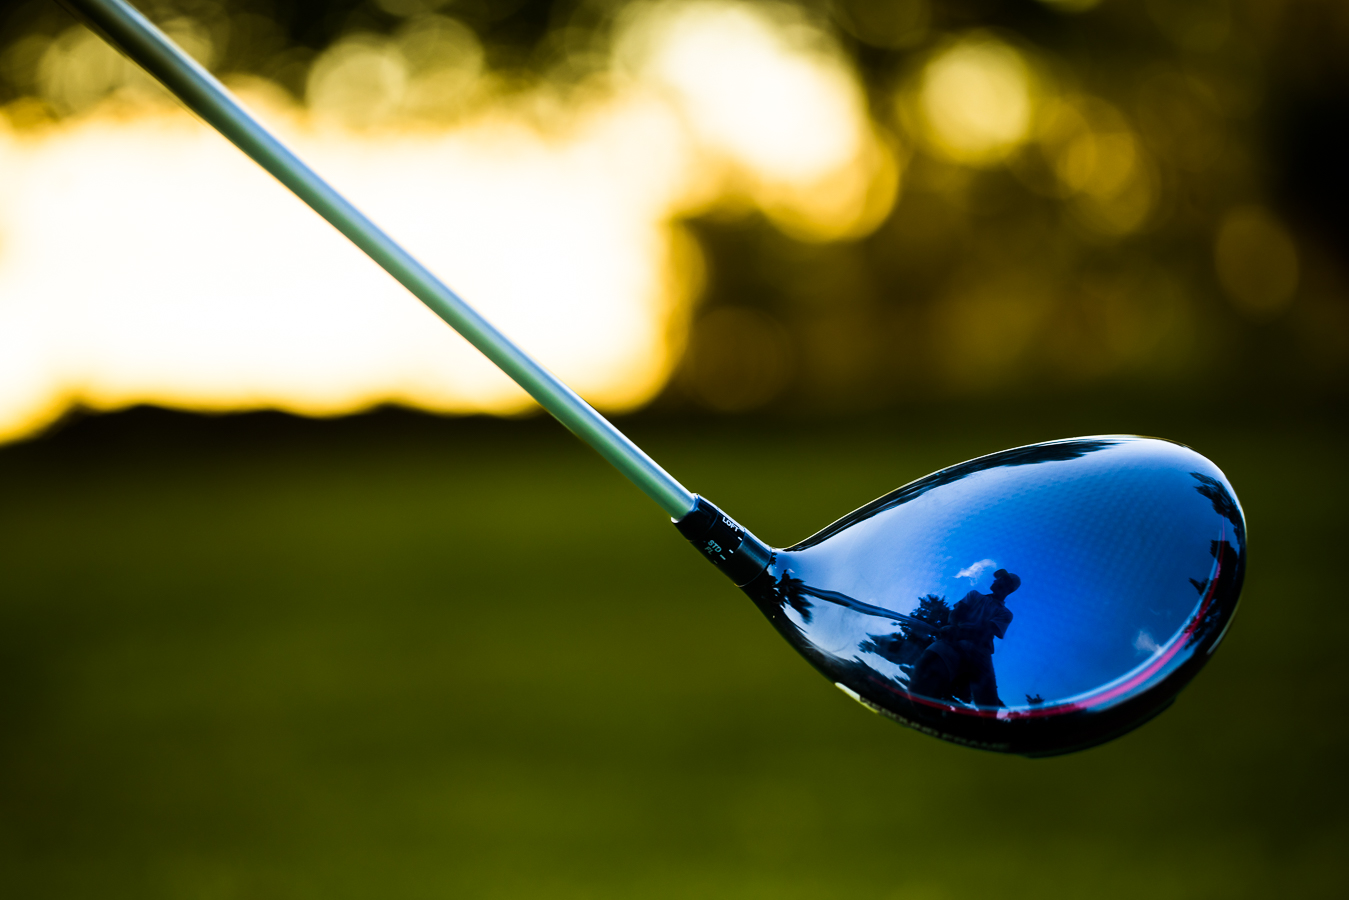 Creative Senior Portrait Photographer, rhinehart photography, captures this creative unique image of this senior as he holds his golf club captured through the reflection on his golf club at the Chambersburg country club 